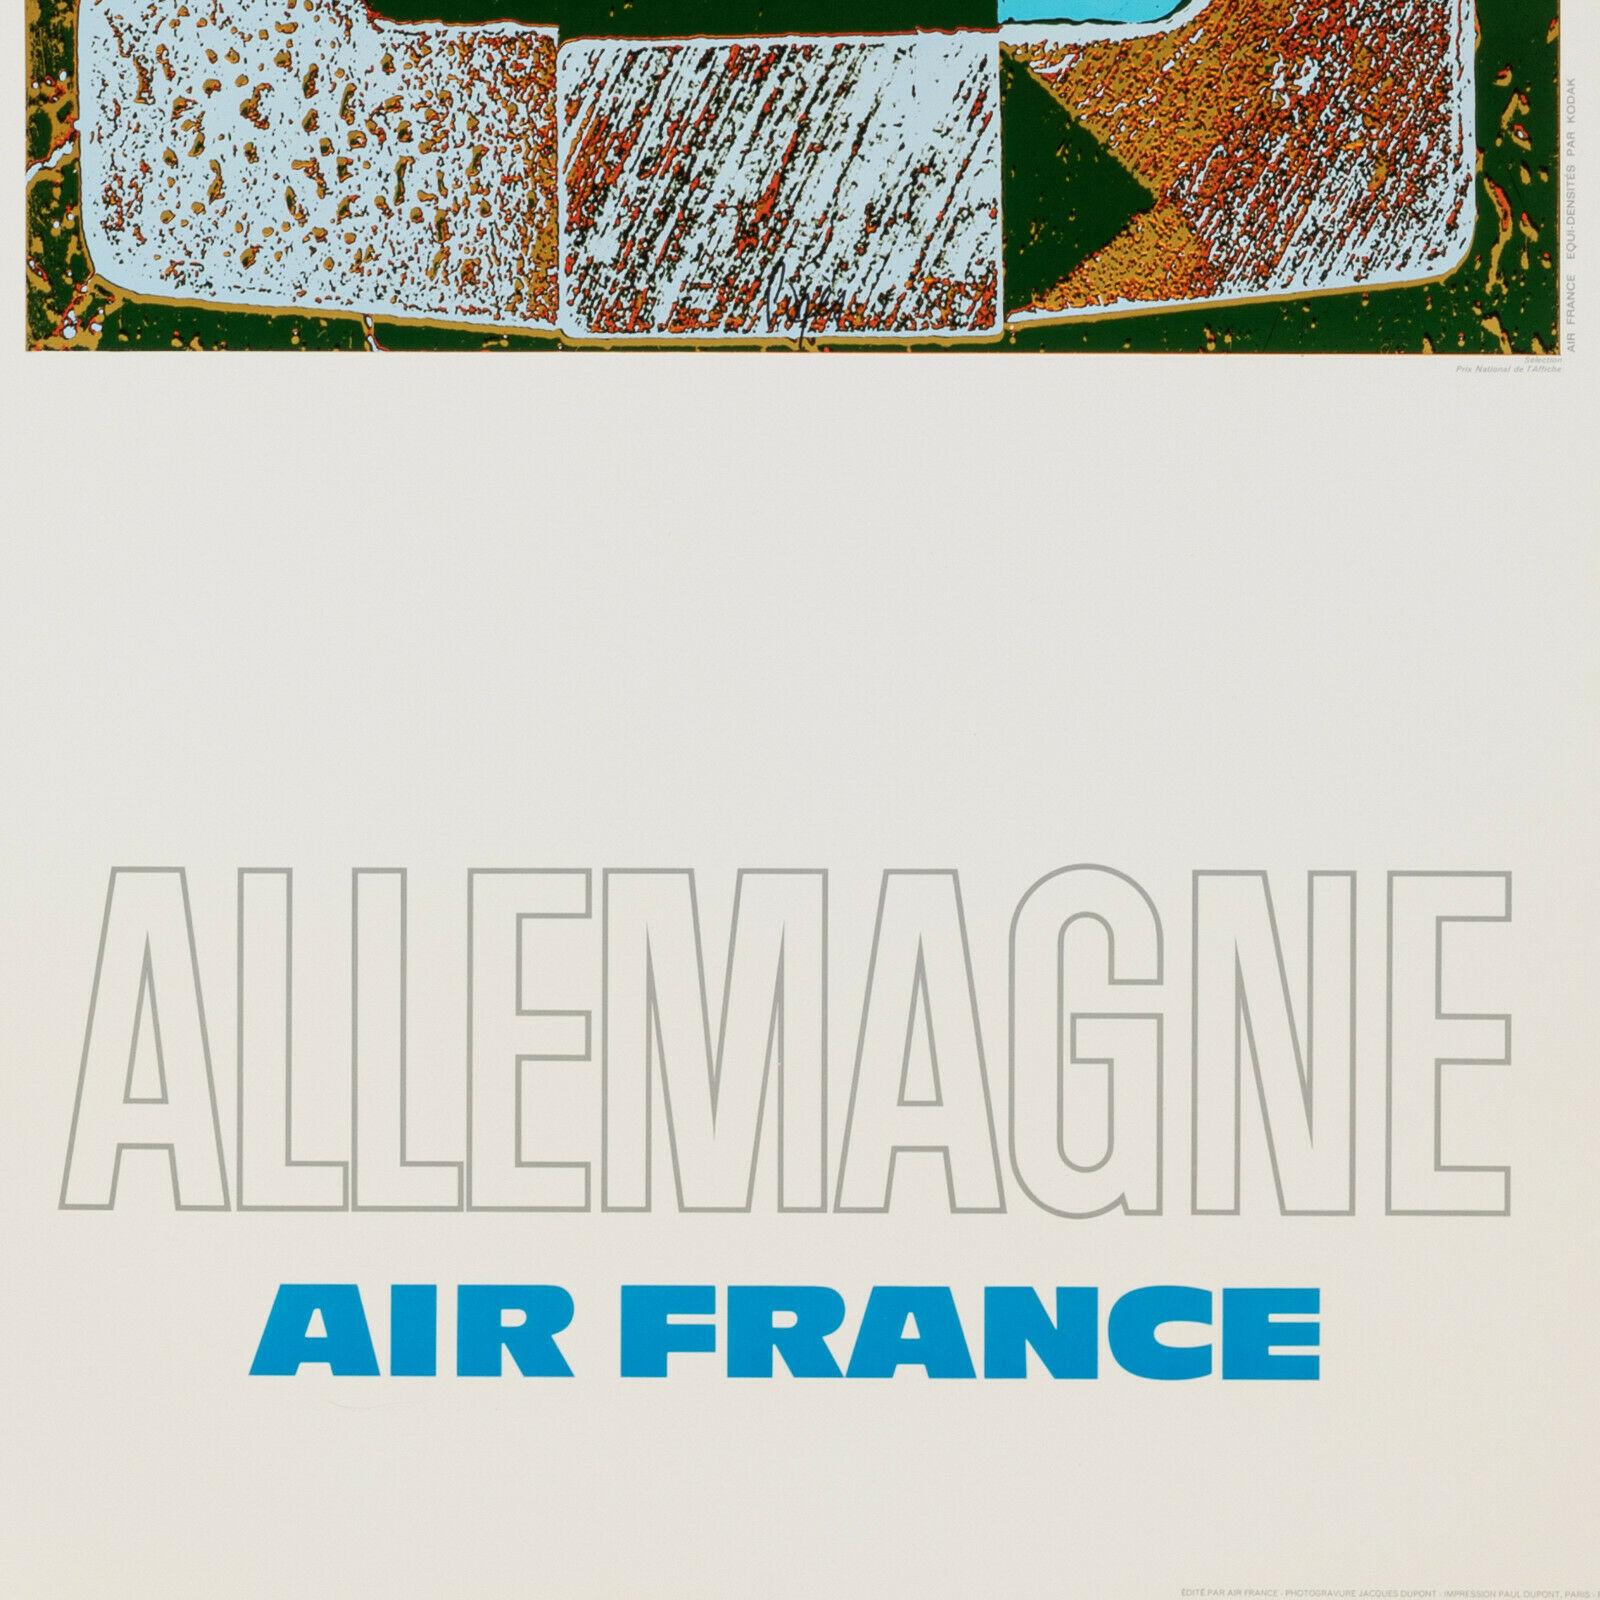 French Raymond Pages, Original Vintage Airline Poster, Air France, Germany, 1971 For Sale